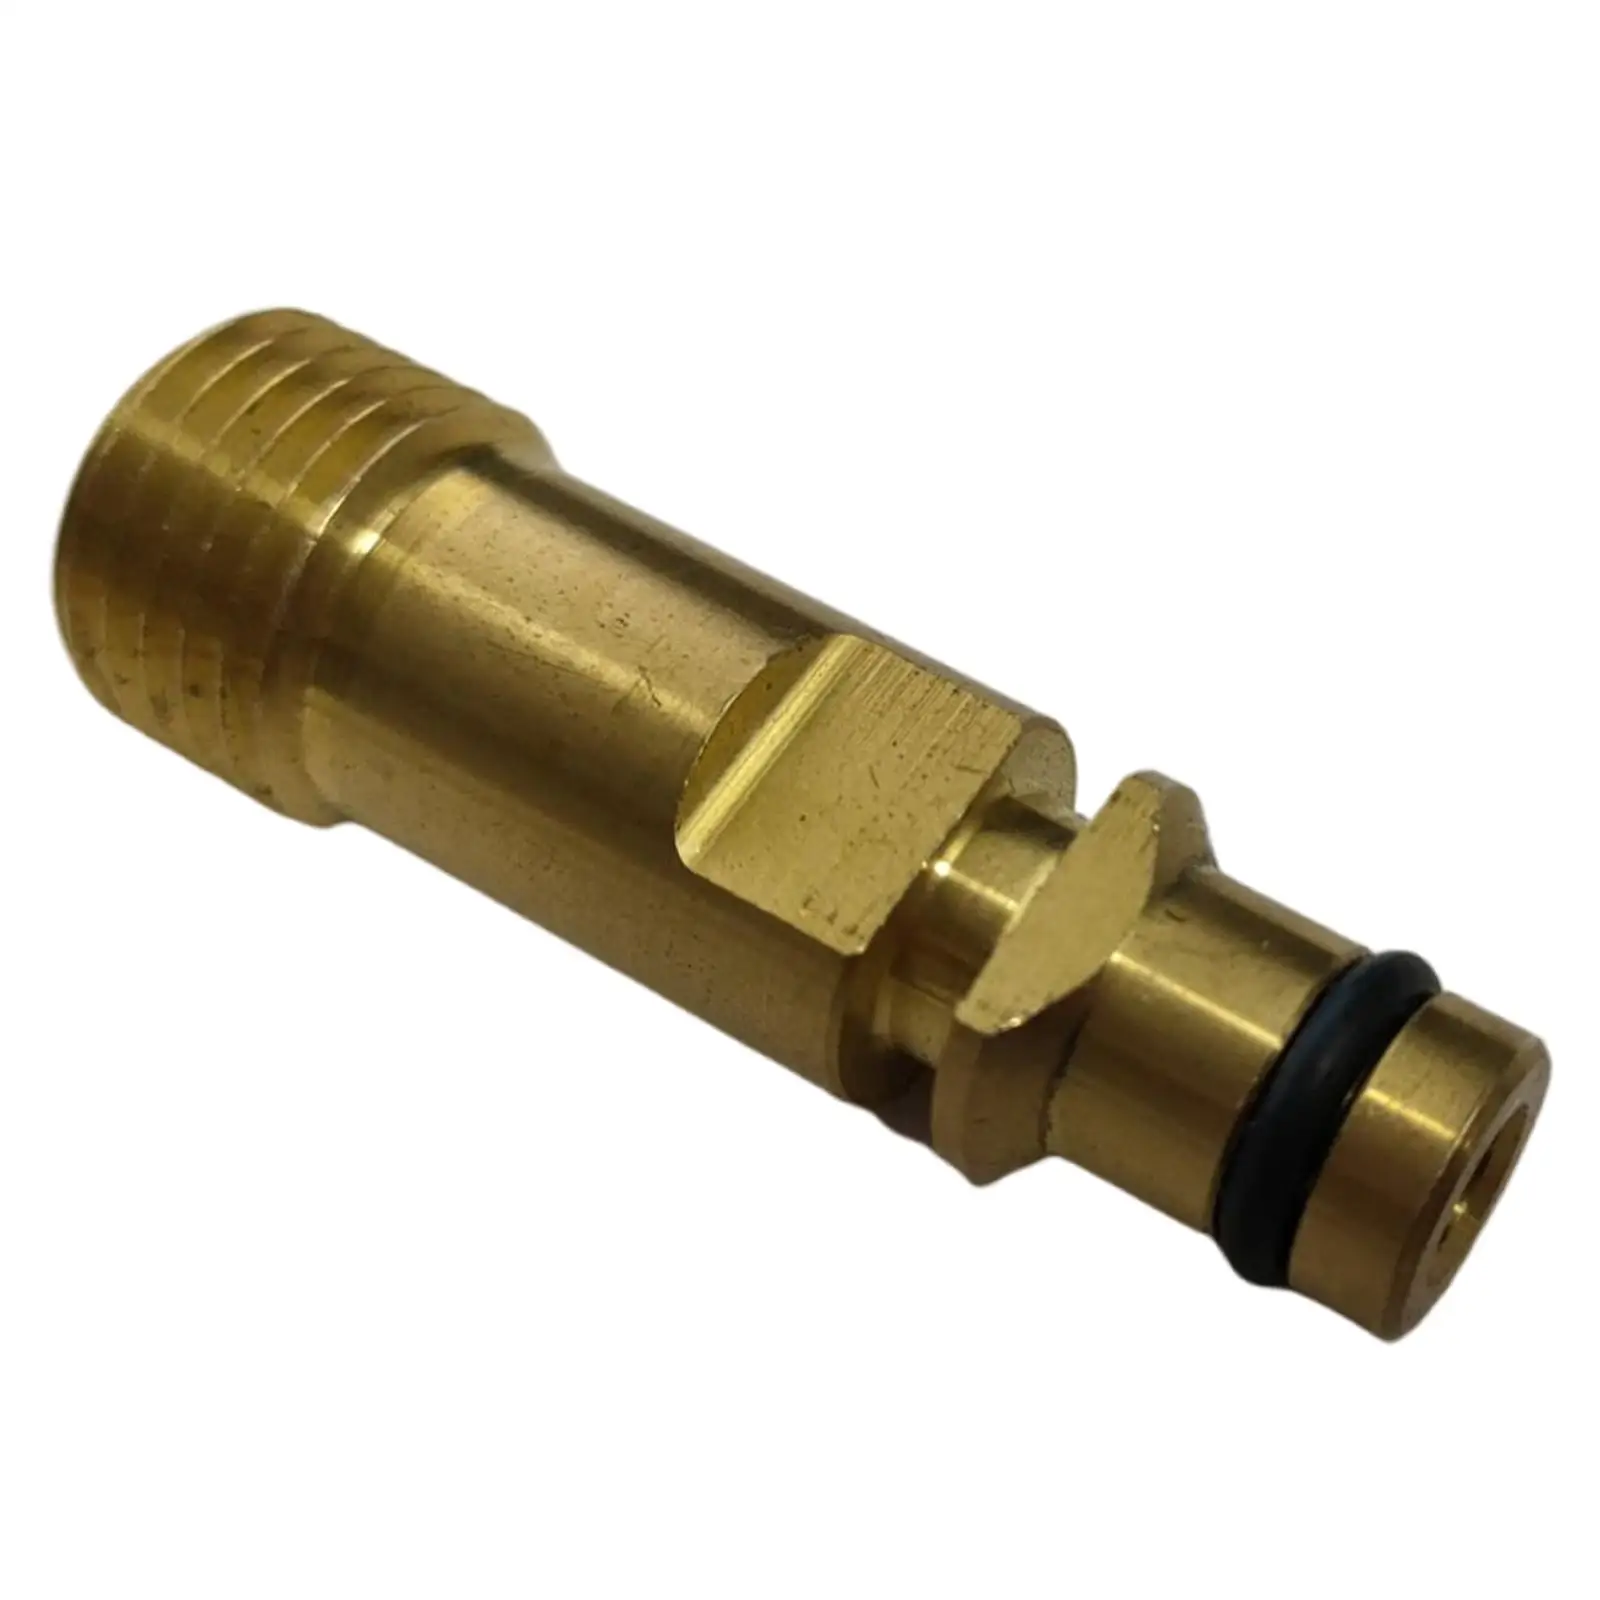 M22*1.5 Pressure Washer Quick Connector Adaptor Durable for Washing Machine